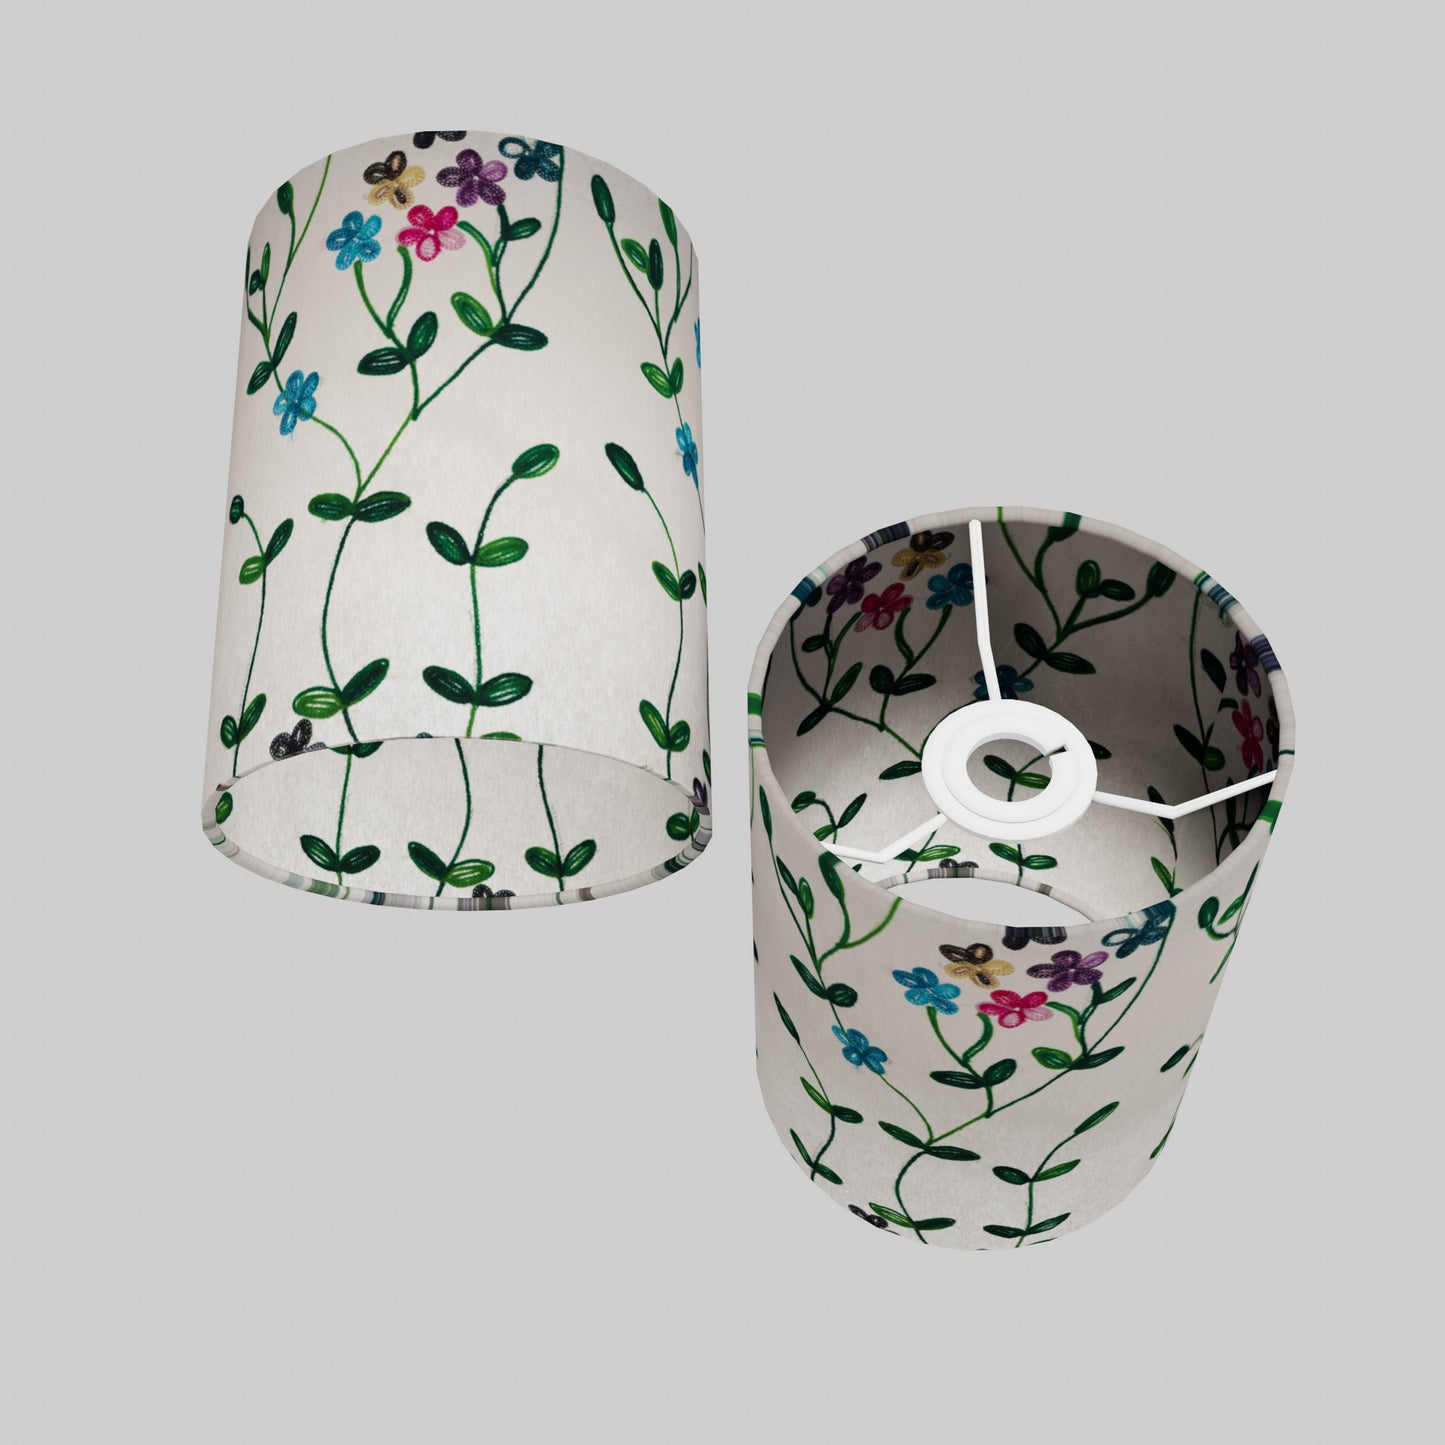 Drum Lamp Shade - P43 ~ Embroidered Flowers on White, 15cm(diameter)